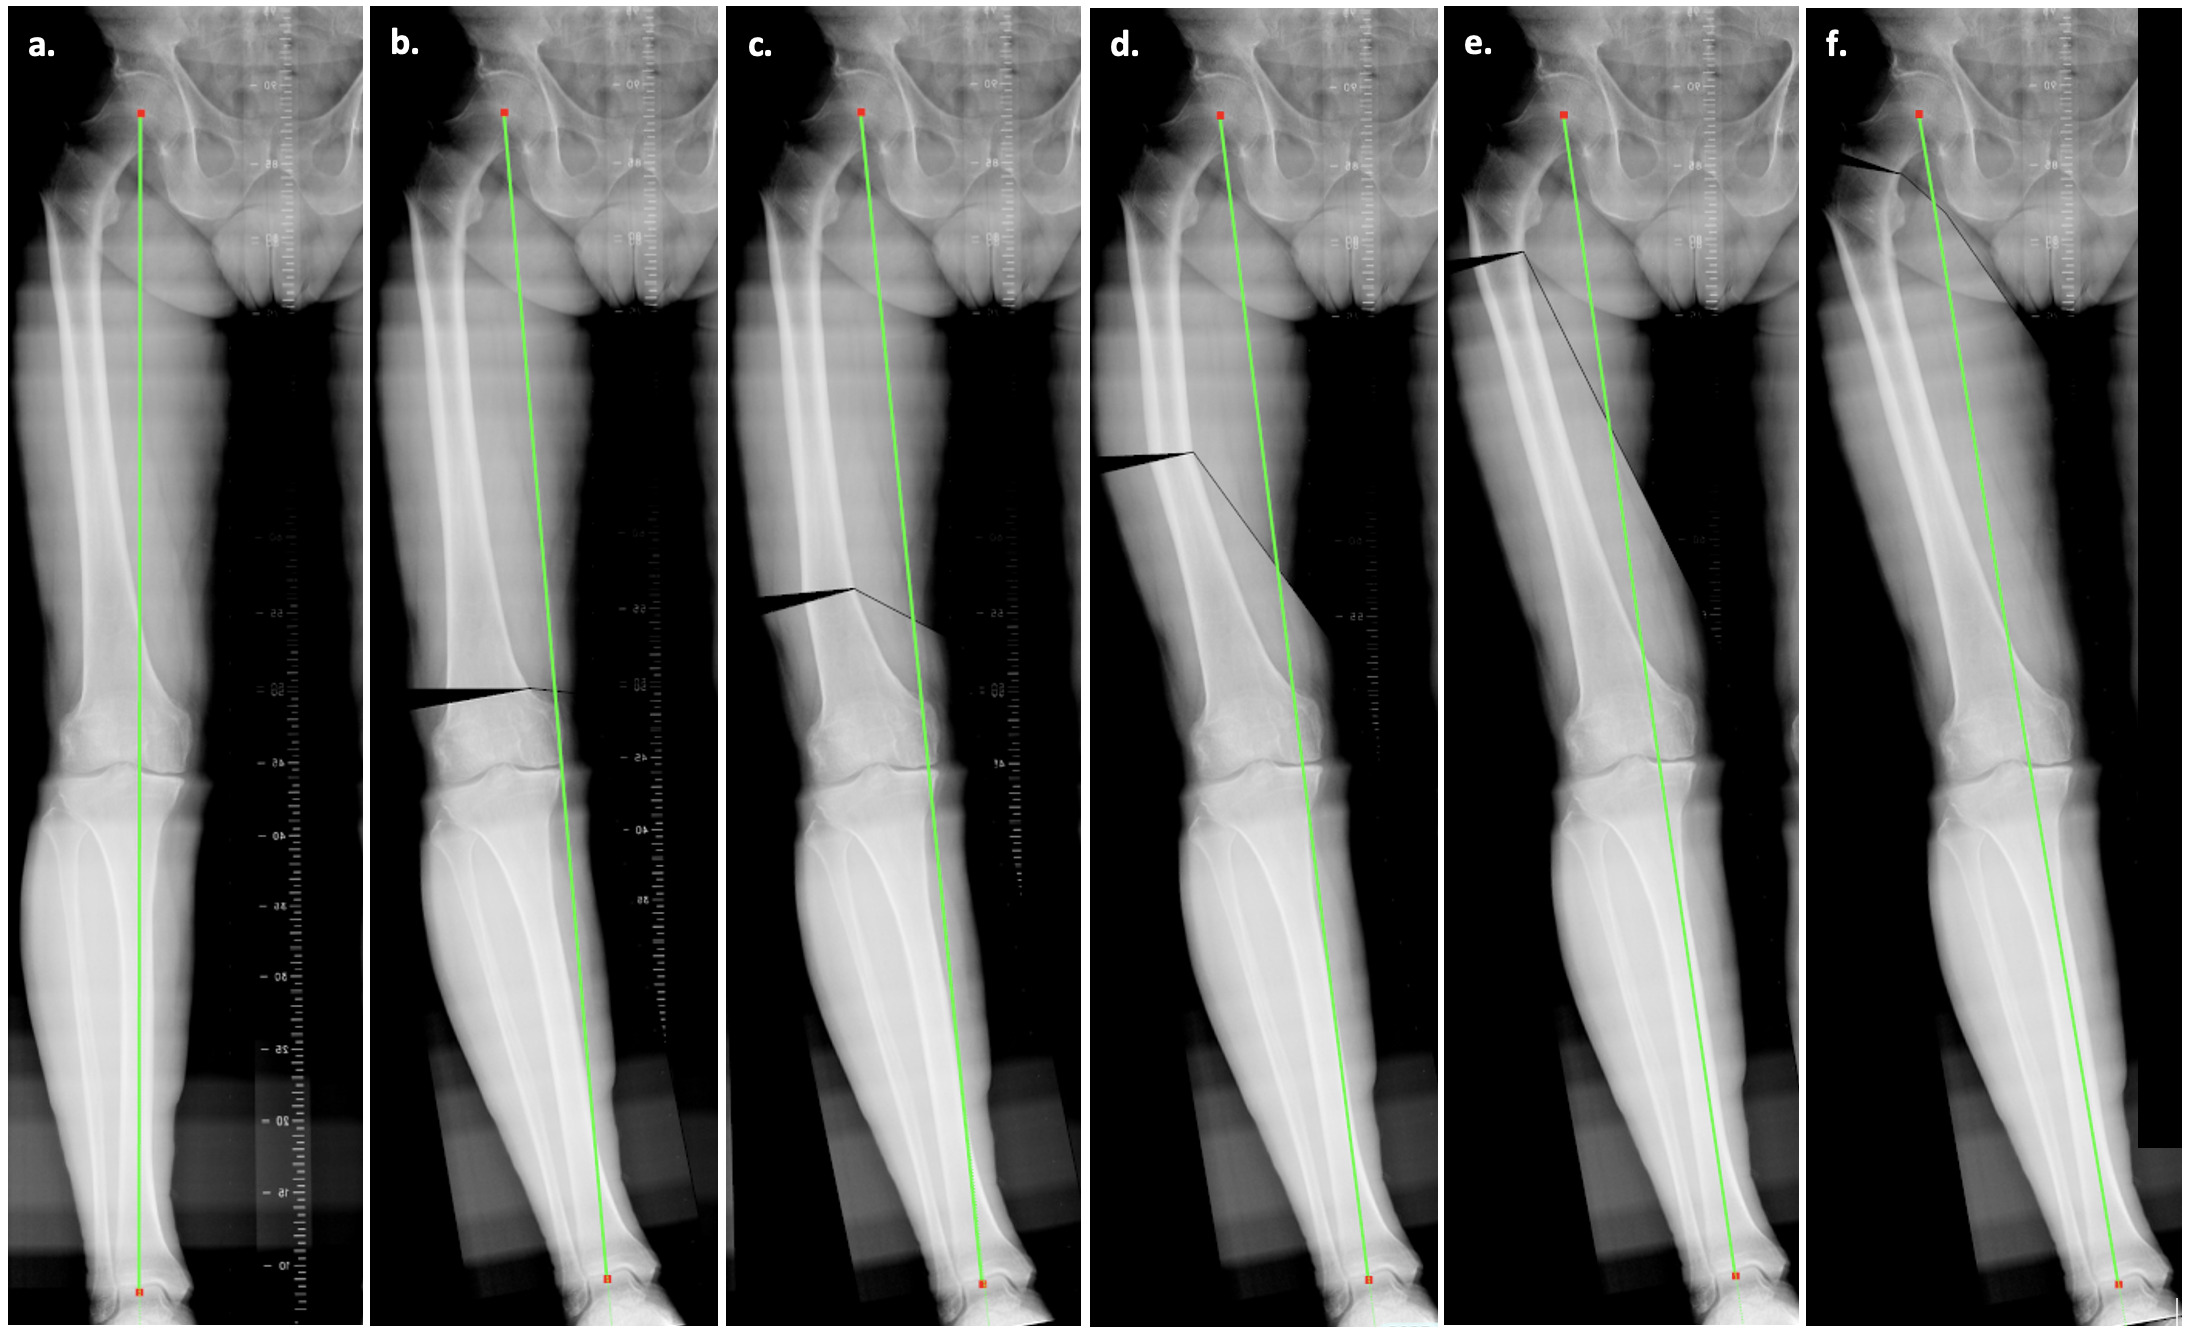 Fig. 5 
            Radiological models of the modifications of the weightbearing line (Mikulicz line) according to the level of the femoral deformity. a) No deformity; b) 10° of distal metaphyseal deformity; c) 10° of distal diaphyseal deformity; d) 10° of middle third diaphyseal deformity; e) 10° of proximal diaphyseal deformity; and f) 10° of proximal deformity.
          